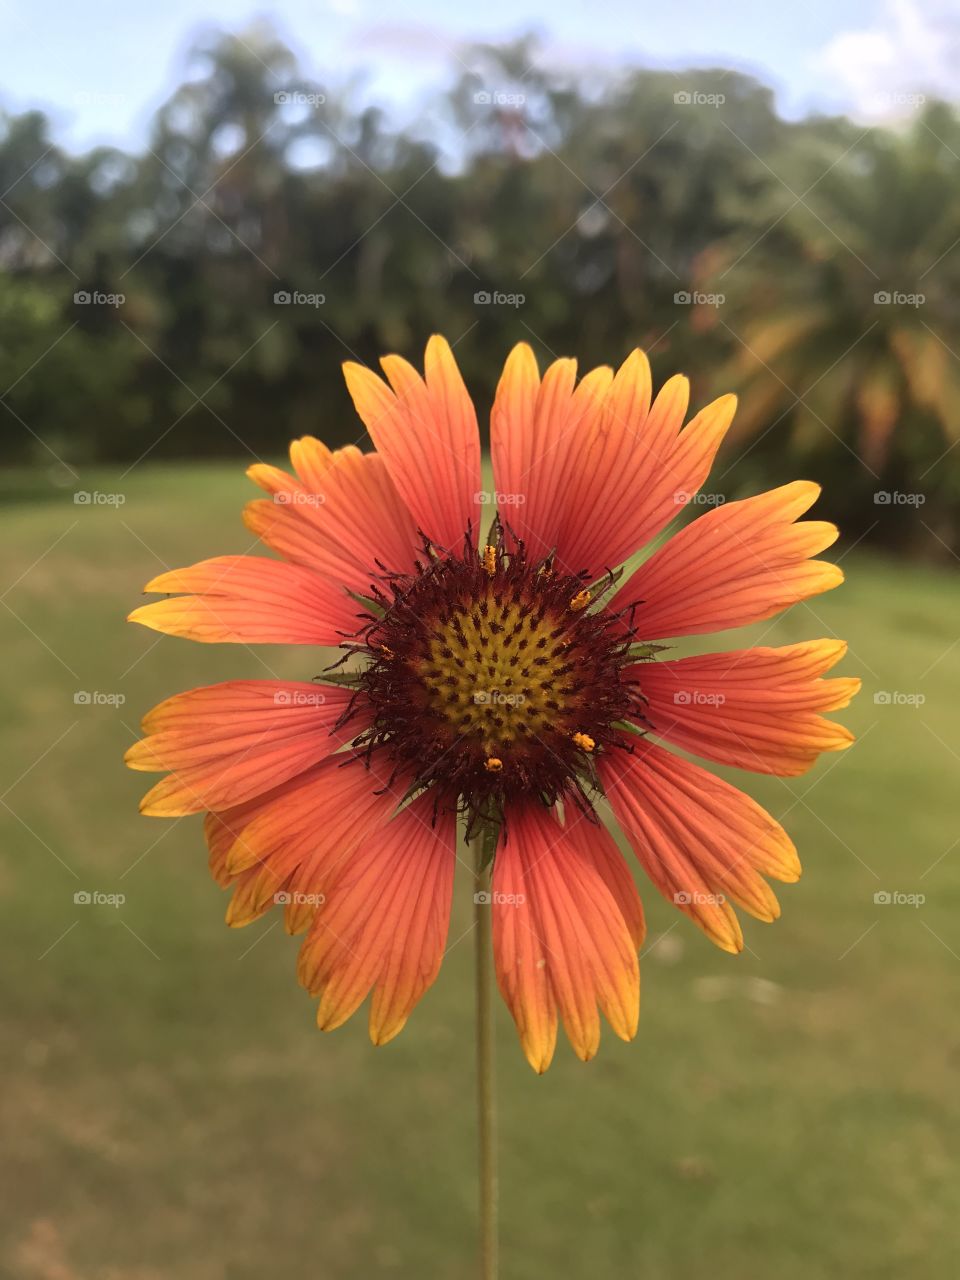 A vibrant flower growing from the garden. It’s petals have a bright orange and red hue. Picked for someone special! 